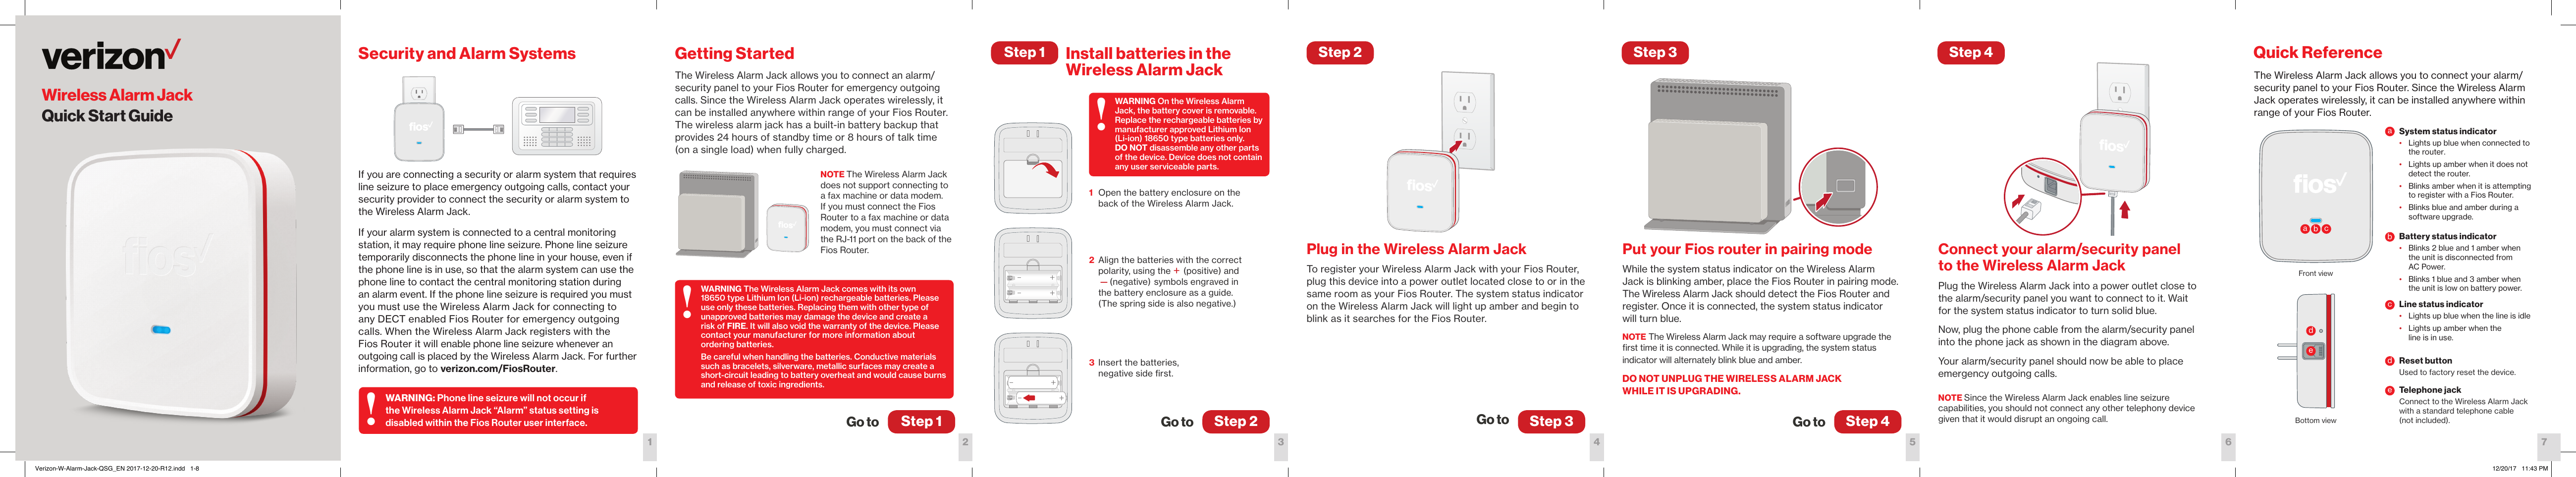 Getting StartedThe Wireless Alarm Jack allows you to connect an alarm/security panel to your Fios Router for emergency outgoing calls. Since the Wireless Alarm Jack operates wirelessly, it can be installed anywhere within range of your Fios Router.  The wireless alarm jack has a built-in battery backup that provides 24 hours of standby time or 8 hours of talk time (on a single load) when fully charged. NOTE The Wireless Alarm Jack does not support connecting to a fax machine or data modem. If you must connect the Fios Router to a fax machine or data modem, you must connect via the RJ-11 port on the back of the Fios Router. Plug in the Wireless Alarm JackTo register your Wireless Alarm Jack with your Fios Router, plug this device into a power outlet located close to or in the same room as your Fios Router. The system status indicator on the Wireless Alarm Jack will light up amber and begin to blink as it searches for the Fios Router. Install batteries in the  Wireless Alarm JackConnect your alarm/security panel to the Wireless Alarm JackPlug the Wireless Alarm Jack into a power outlet close to the alarm/security panel you want to connect to it. Wait for the system status indicator to turn solid blue. Now, plug the phone cable from the alarm/security panel into the phone jack as shown in the diagram above.Your alarm/security panel should now be able to place emergency outgoing calls. NOTE Since the Wireless Alarm Jack enables line seizure capabilities, you should not connect any other telephony device given that it would disrupt an ongoing call.Put your Fios router in pairing modeWhile the system status indicator on the Wireless Alarm Jack is blinking amber, place the Fios Router in pairing mode. The Wireless Alarm Jack should detect the Fios Router and register. Once it is connected, the system status indicator  will turn blue.NOTE The Wireless Alarm Jack may require a software upgrade the ﬁrst time it is connected. While it is upgrading, the system status indicator will alternately blink blue and amber.DO NOT UNPLUG THE WIRELESS ALARM JACK WHILE IT IS UPGRADING. Step 1Go toStep 2Step 1 Step 3 Step 4Step 3Go toStep 2Go to Step 4Go to321 4 5 6Wireless Alarm JackQuick Start GuideThe Wireless Alarm Jack allows you to connect your alarm/security panel to your Fios Router. Since the Wireless Alarm Jack operates wirelessly, it can be installed anywhere within range of your Fios Router.7Quick ReferenceSystem status indicator•  Lights up blue when connected to the router. •  Lights up amber when it does not detect the router. •  Blinks amber when it is attempting to register with a Fios Router.•  Blinks blue and amber during a software upgrade.Battery status indicator•  Blinks 2 blue and 1 amber when the unit is disconnected from  AC Power.•  Blinks 1 blue and 3 amber when the unit is low on battery power.Line status indicator•  Lights up blue when the line is idle•  Lights up amber when the  line is in use.Reset buttonUsed to factory reset the device. Telephone jackConnect to the Wireless Alarm Jack with a standard telephone cable  (not included).Front viewBottom viewSecurity and Alarm SystemsIf you are connecting a security or alarm system that requires line seizure to place emergency outgoing calls, contact your security provider to connect the security or alarm system to the Wireless Alarm Jack. If your alarm system is connected to a central monitoring station, it may require phone line seizure. Phone line seizure temporarily disconnects the phone line in your house, even if the phone line is in use, so that the alarm system can use the phone line to contact the central monitoring station during  an alarm event. If the phone line seizure is required you must you must use the Wireless Alarm Jack for connecting to  any DECT enabled Fios Router for emergency outgoing calls. When the Wireless Alarm Jack registers with the Fios Router it will enable phone line seizure whenever an outgoing call is placed by the Wireless Alarm Jack. For further information, go to verizon.com/FiosRouter.WARNING: Phone line seizure will not occur if the Wireless Alarm Jack “Alarm” status setting is disabled within the Fios Router user interface.WARNING On the Wireless Alarm Jack, the battery cover is removable. Replace the rechargeable batteries by manufacturer approved Lithium Ion  (Li-ion) 18650 type batteries only.  DO NOT disassemble any other parts  of the device. Device does not contain any user serviceable parts.WARNING The Wireless Alarm Jack comes with its own 18650 type Lithium Ion (Li-ion) rechargeable batteries. Please use only these batteries. Replacing them with other type of unapproved batteries may damage the device and create a risk of FIRE. It will also void the warranty of the device. Please contact your manufacturer for more information about  ordering batteries.Be careful when handling the batteries. Conductive materials such as bracelets, silverware, metallic surfaces may create a short-circuit leading to battery overheat and would cause burns and release of toxic ingredients.1  Open the battery enclosure on the back of the Wireless Alarm Jack. 2  Align the batteries with the correct polarity, using the + (positive) and  —(negative) symbols engraved in  the battery enclosure as a guide.  (The spring side is also negative.) 3  Insert the batteries,  negative side ﬁrst.!!!aacceebbddVerizon-W-Alarm-Jack-QSG_EN 2017-12-20-R12.indd   1-8 12/20/17   11:43 PM